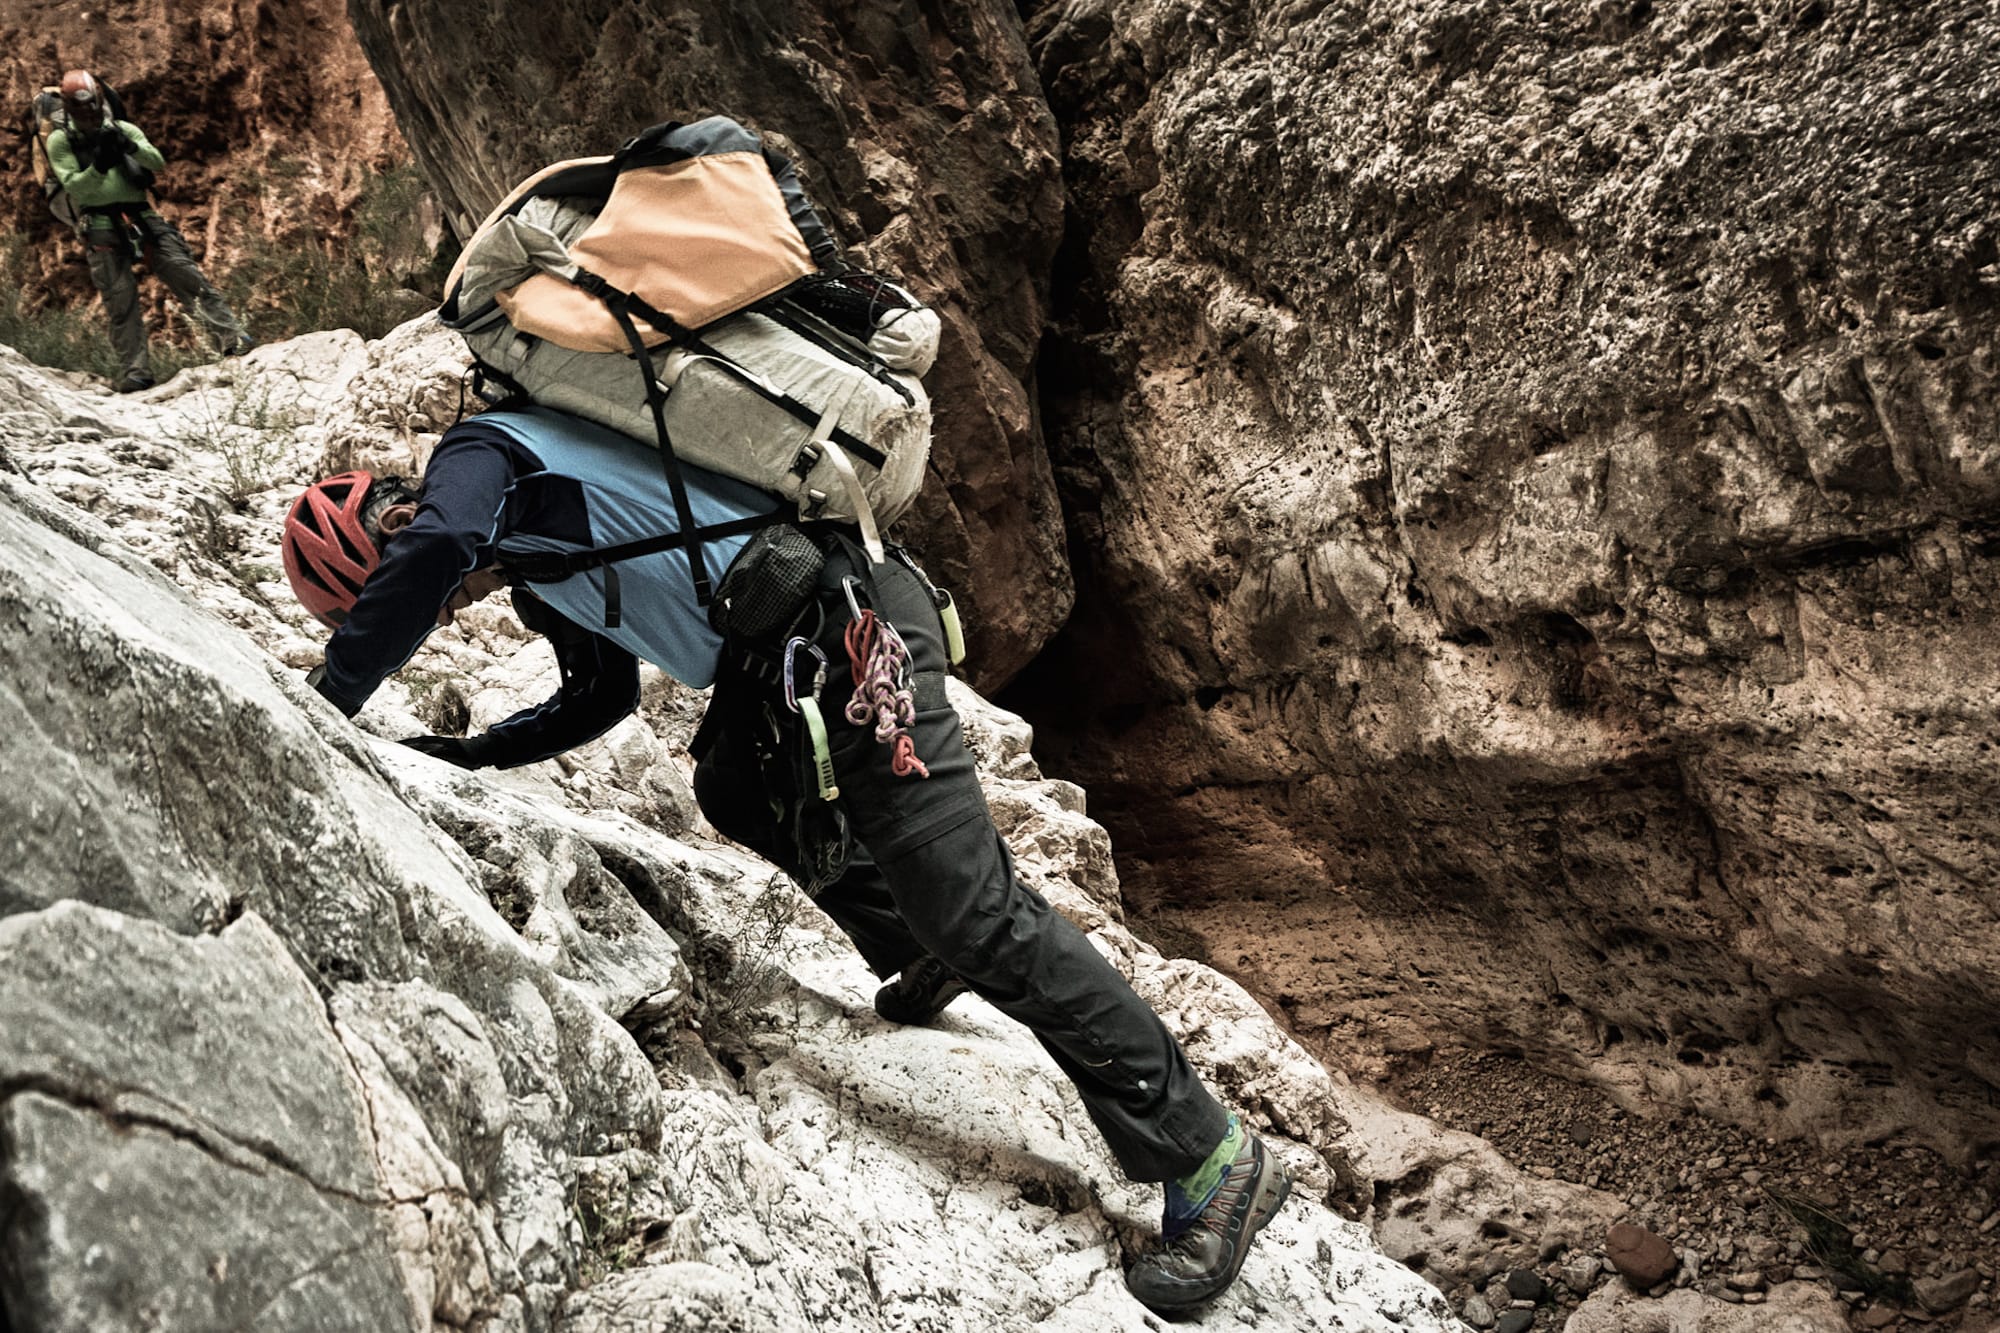 Ambassadors Moe Witschard and Rich Rudow down climbing through remote canyons.